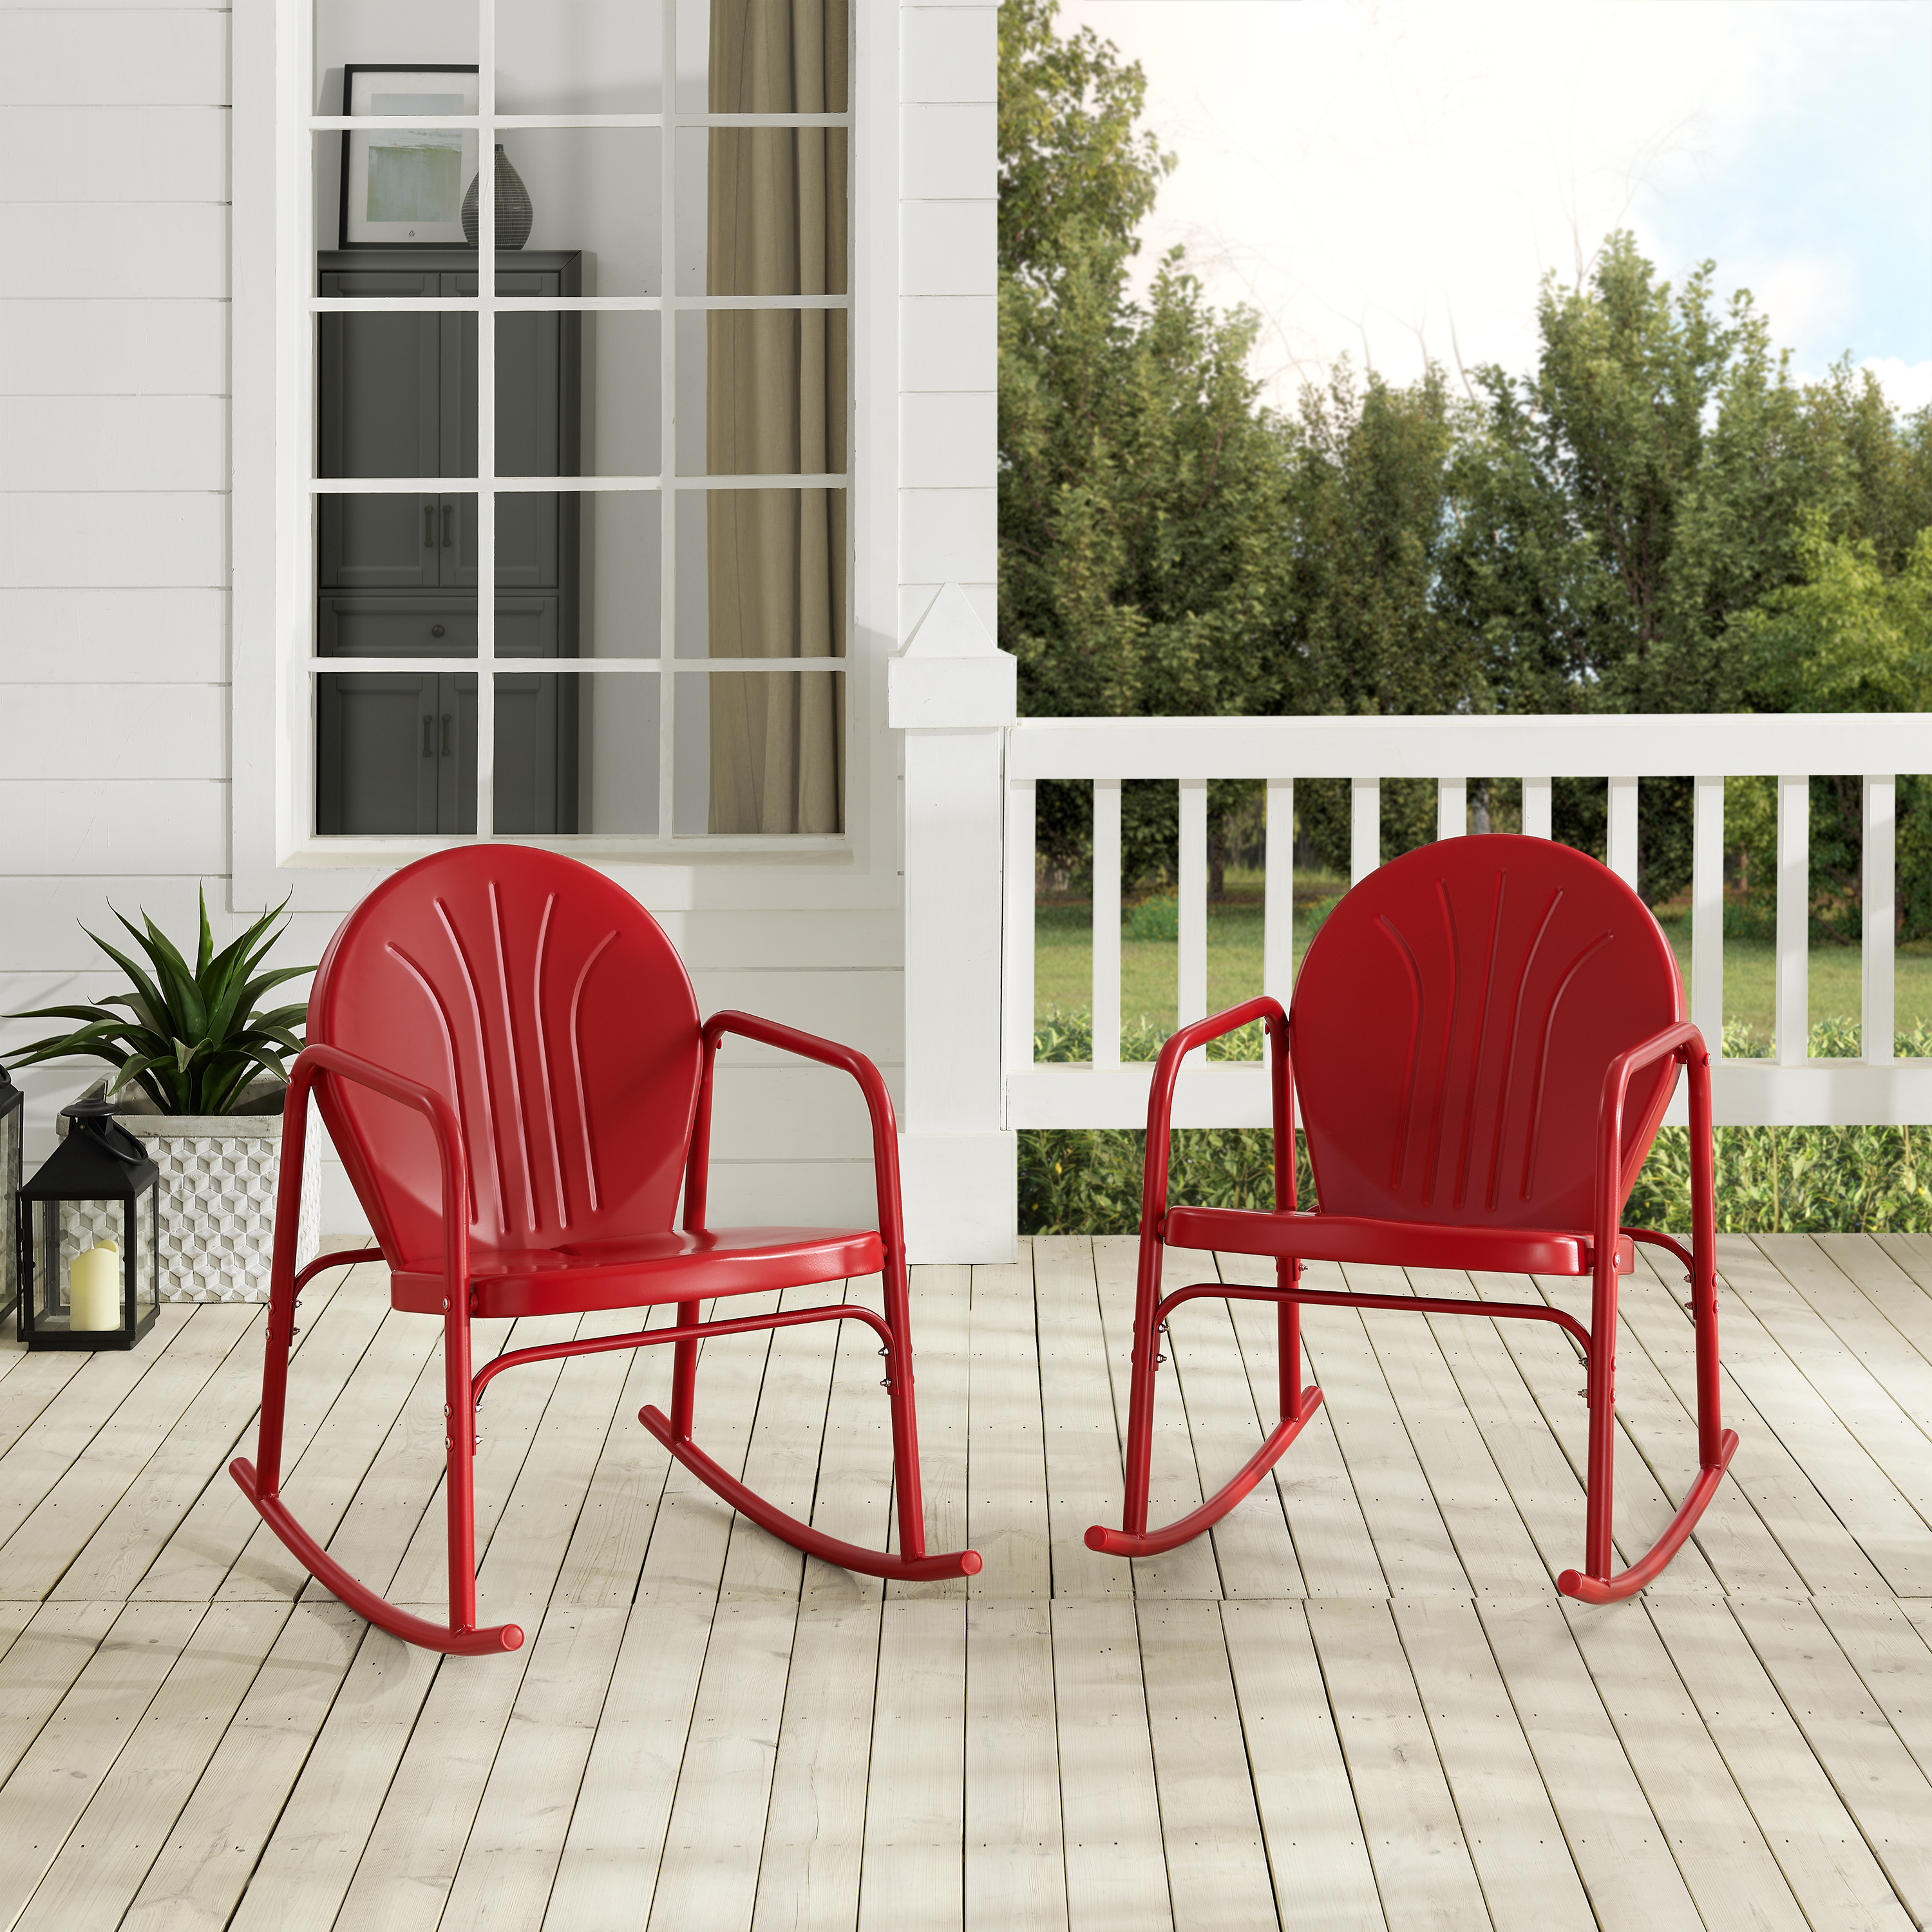 Crosley Furniture Griffith Metal Rocking Chair in Bright Red Gloss (Set of 2) - image 4 of 13